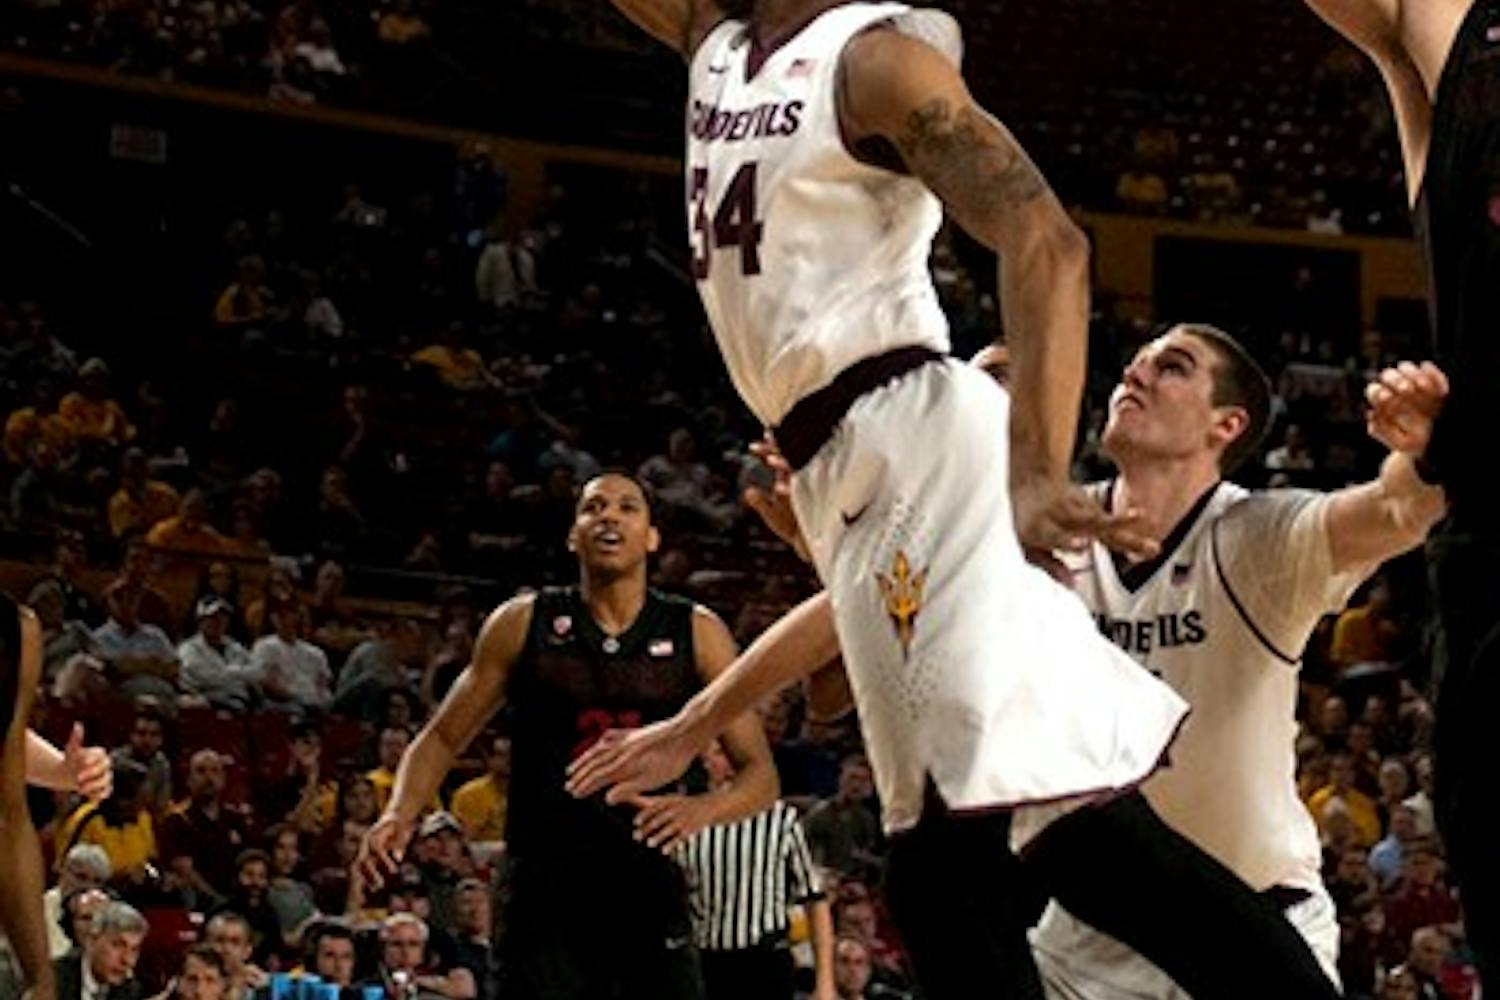 Senior guard Jermaine Marshall scores a lay up in a match against Stanford on Feb. 26. (Photo by Mario Mendez)